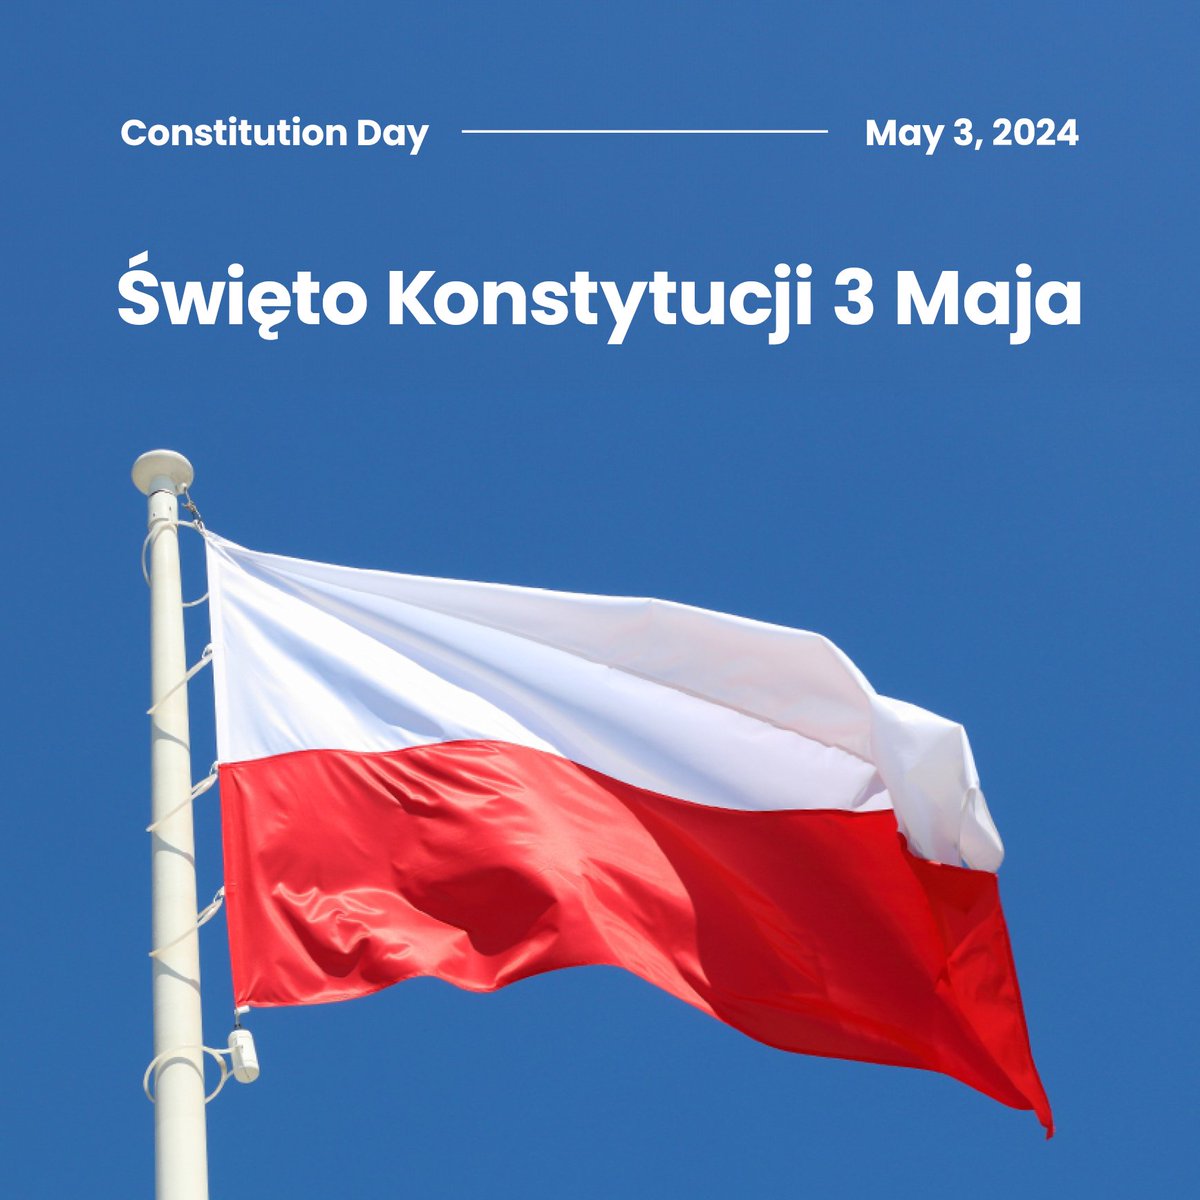 Happy Constitution Day to our team members, customers, partners, and suppliers in Poland!